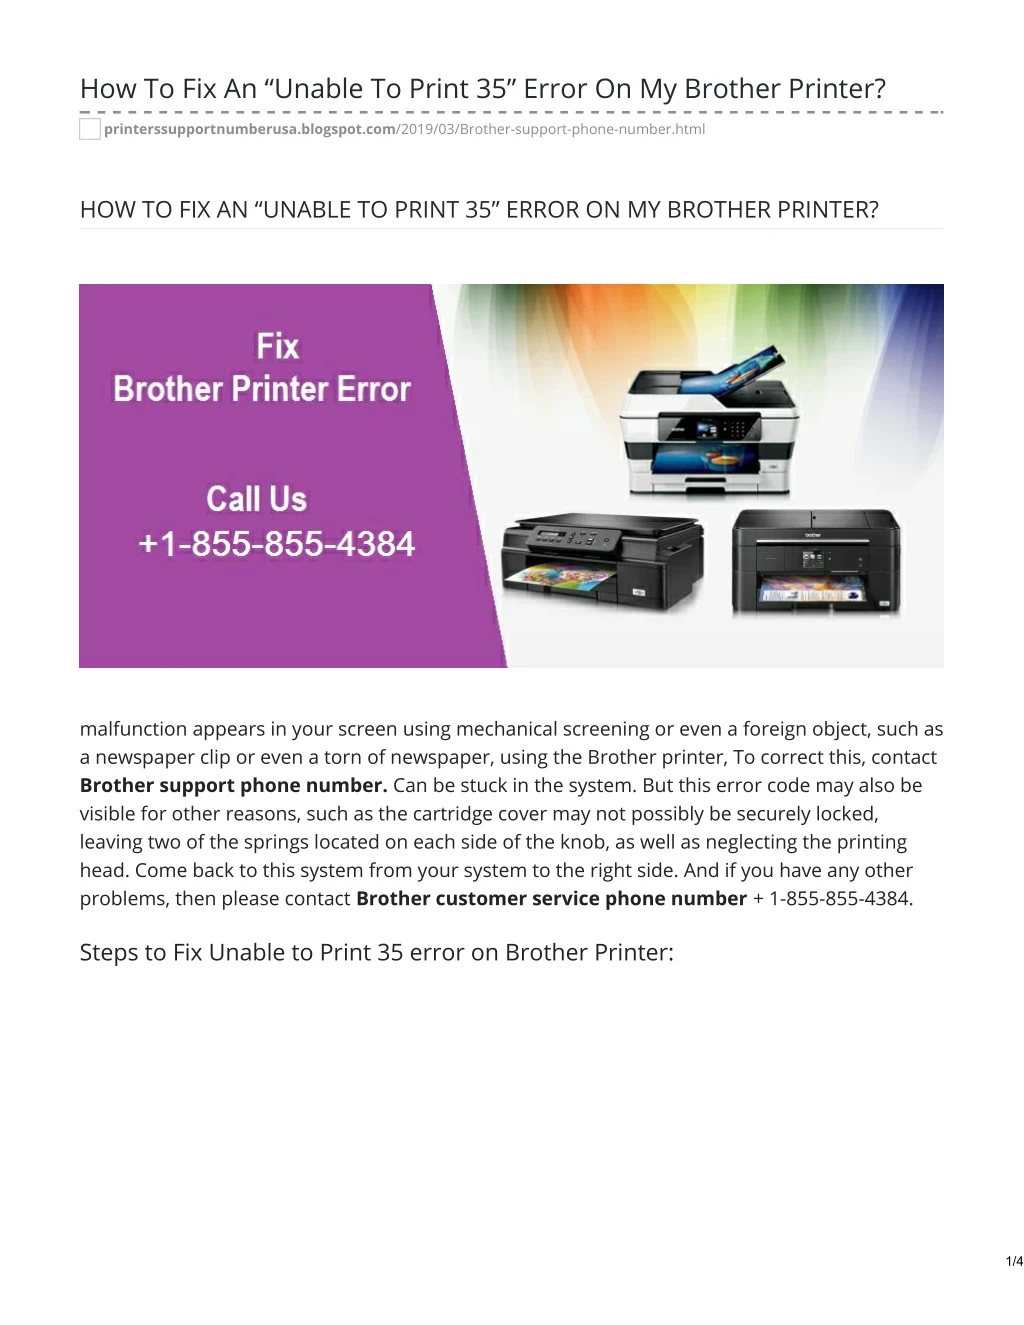 how to fix an unable to print 35 error